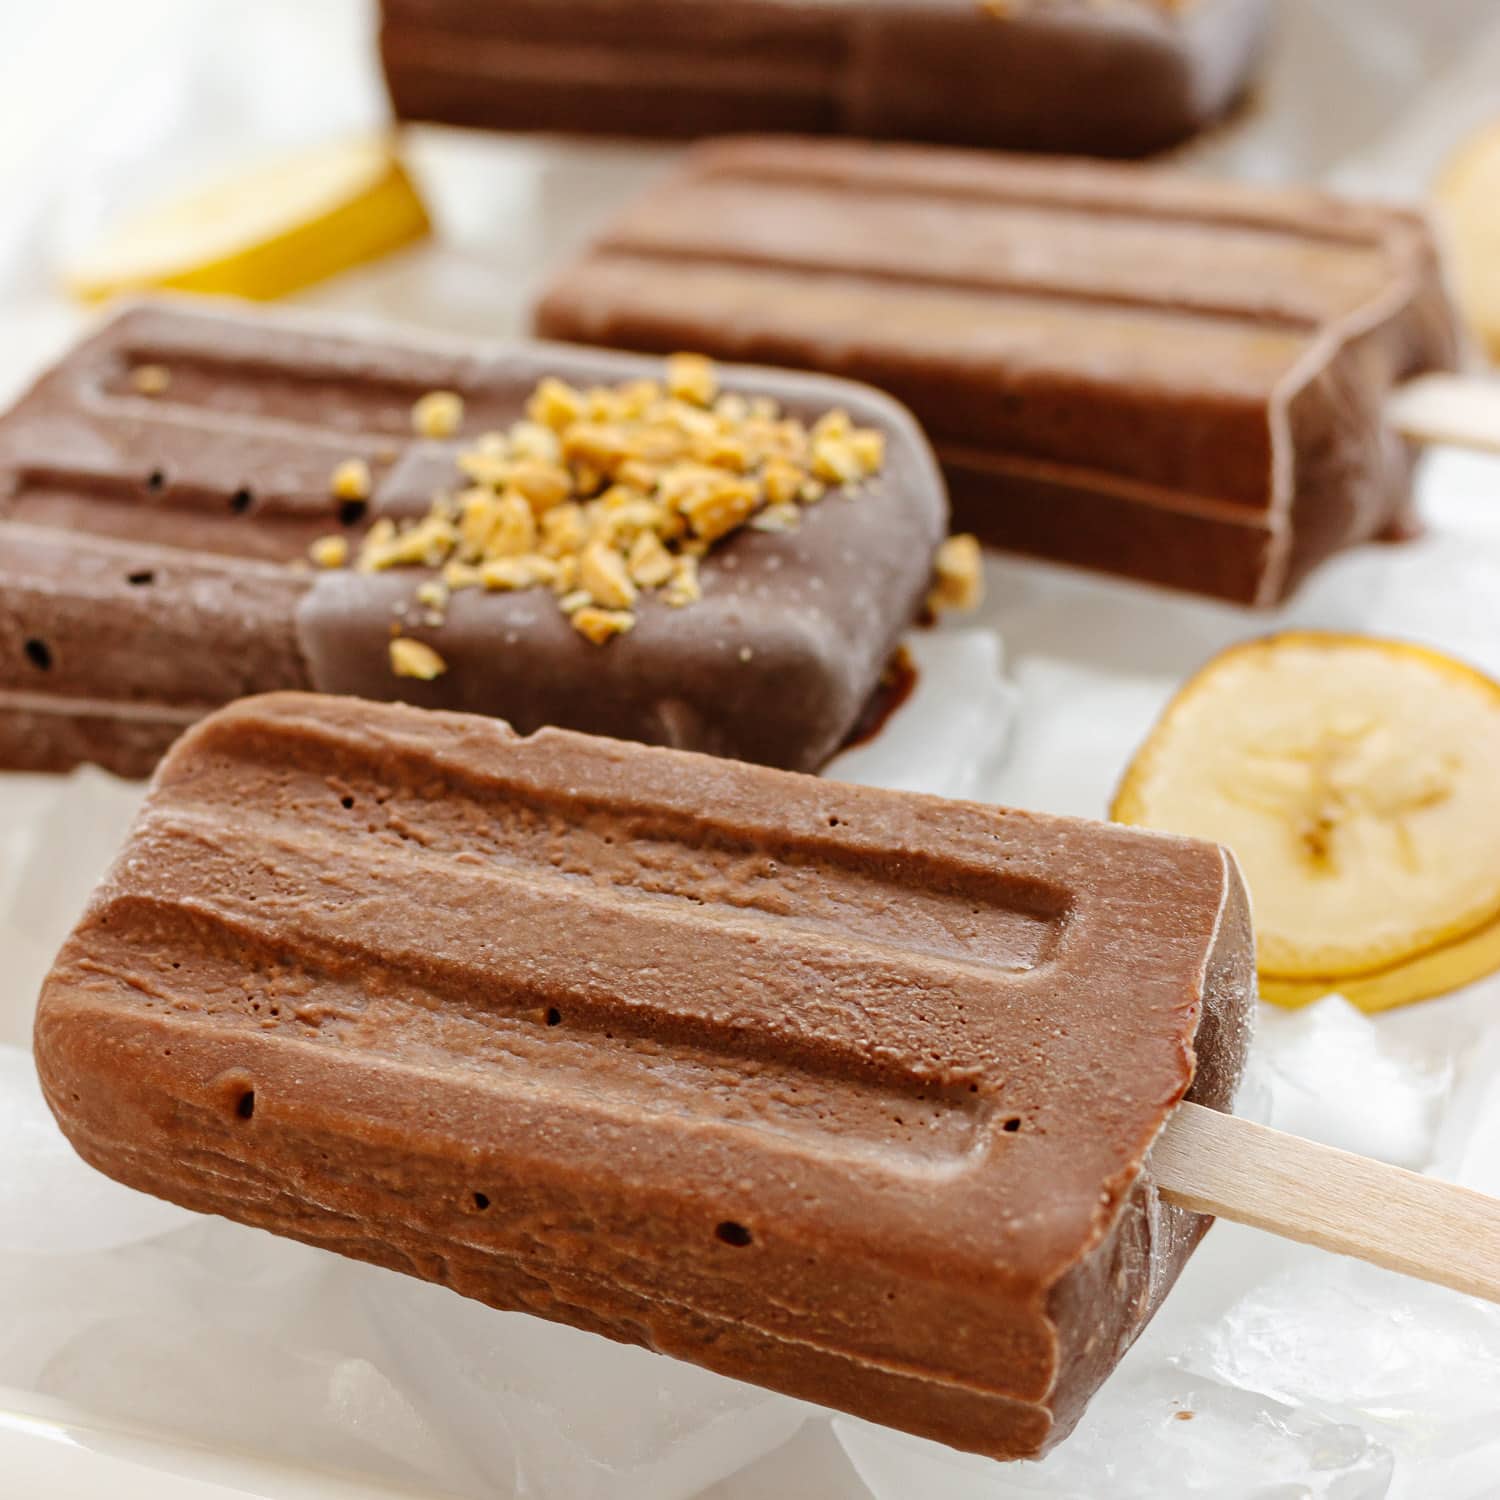 Chocolate banana popsicles over ice with slices of banana.